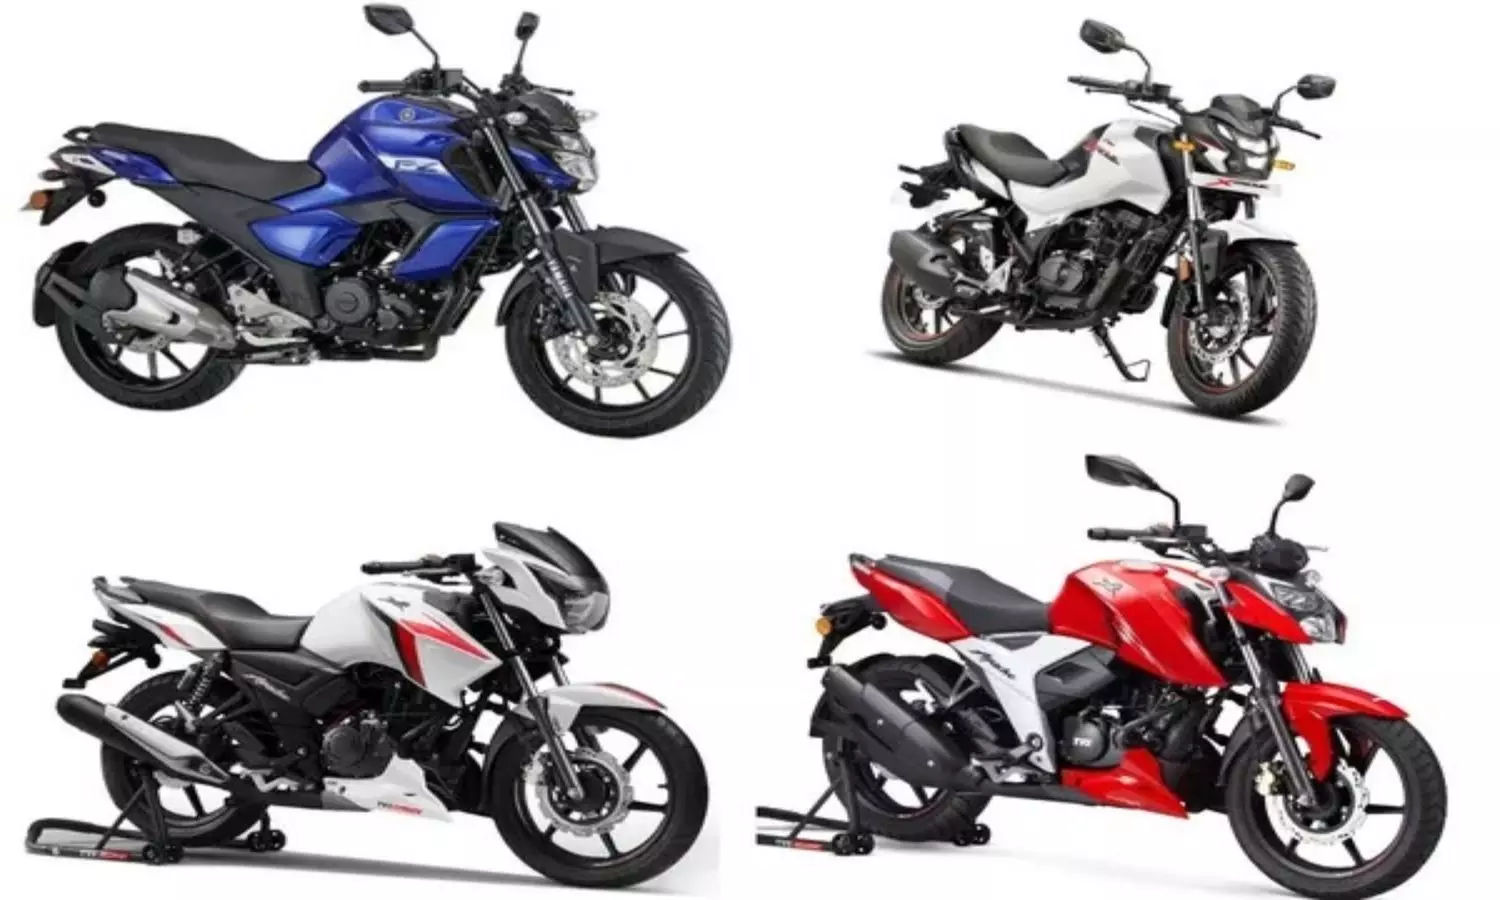 From Hero Xtreme 160R to Bajaj Pulsar 150 these 5 bikes for highway and high speed stability under 2 lakh